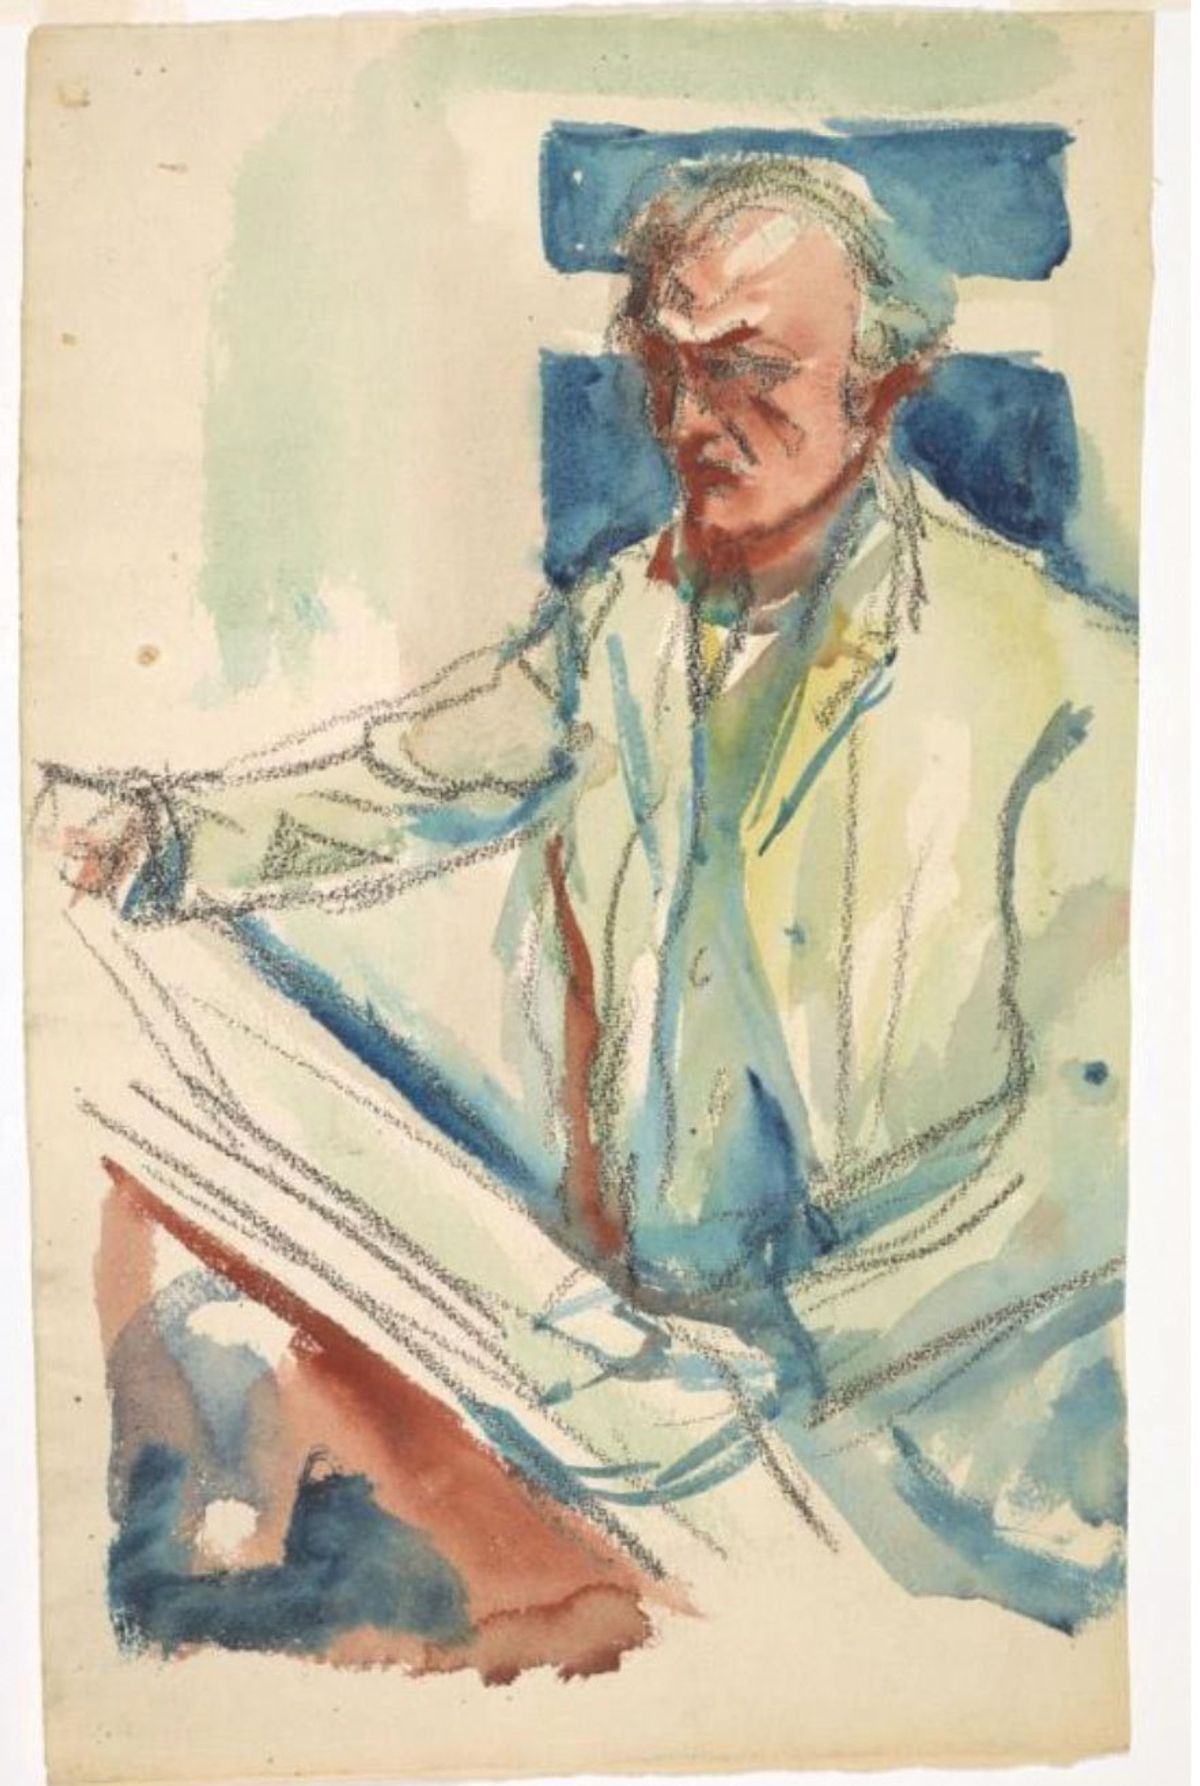 Munch’s Self-portrait with Sketchbook (1914-19) is part of the new online database Munch Museum